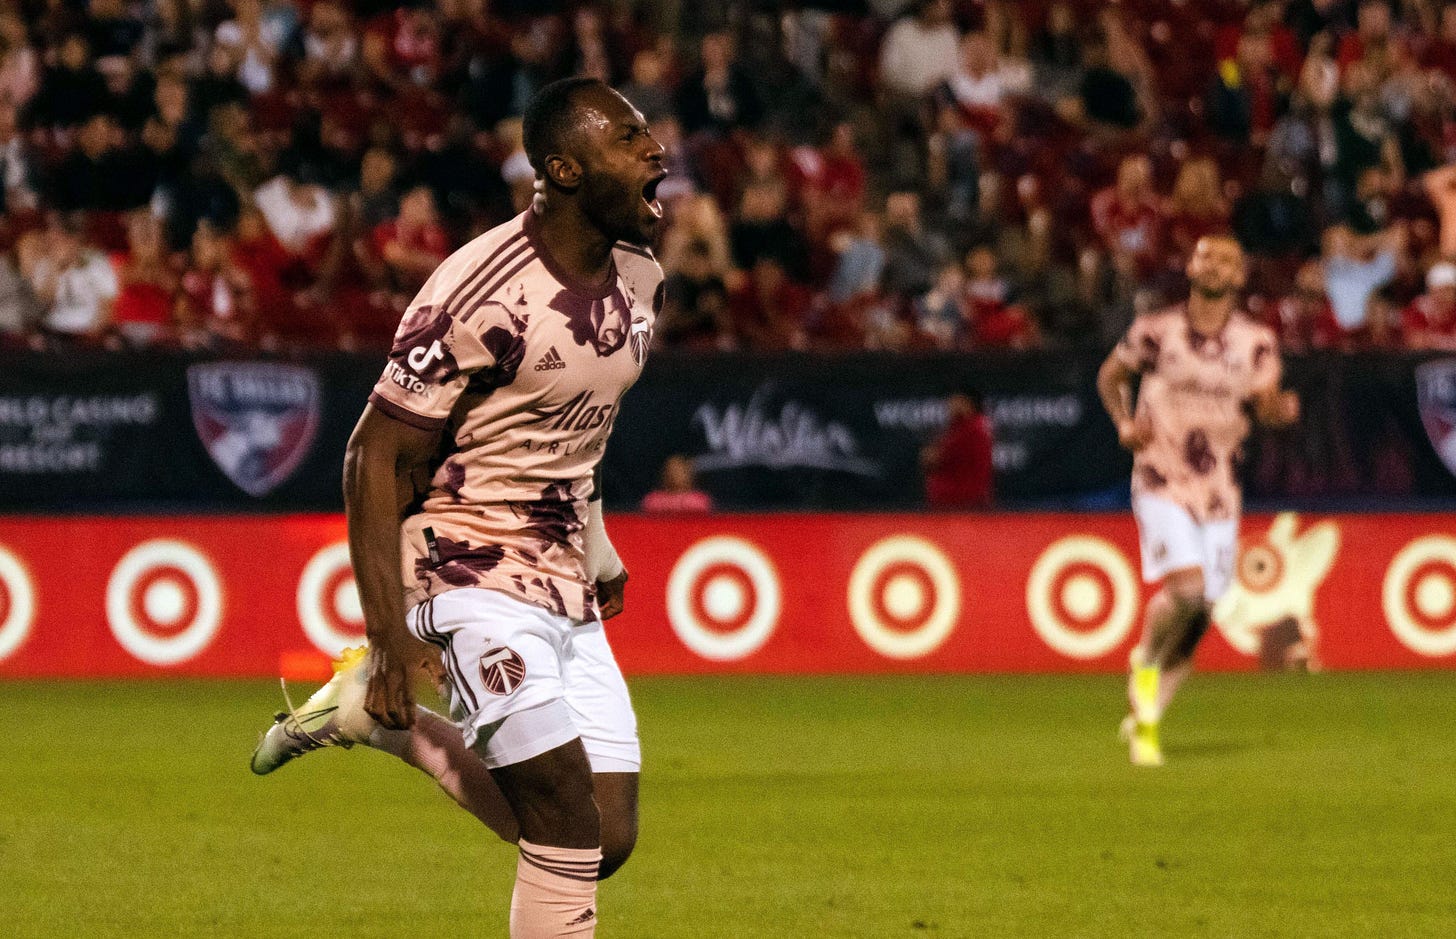 Newcomer Franck Boli scores late goal, Portland Timbers pull out  well-earned 1-1 draw at FC Dallas - oregonlive.com